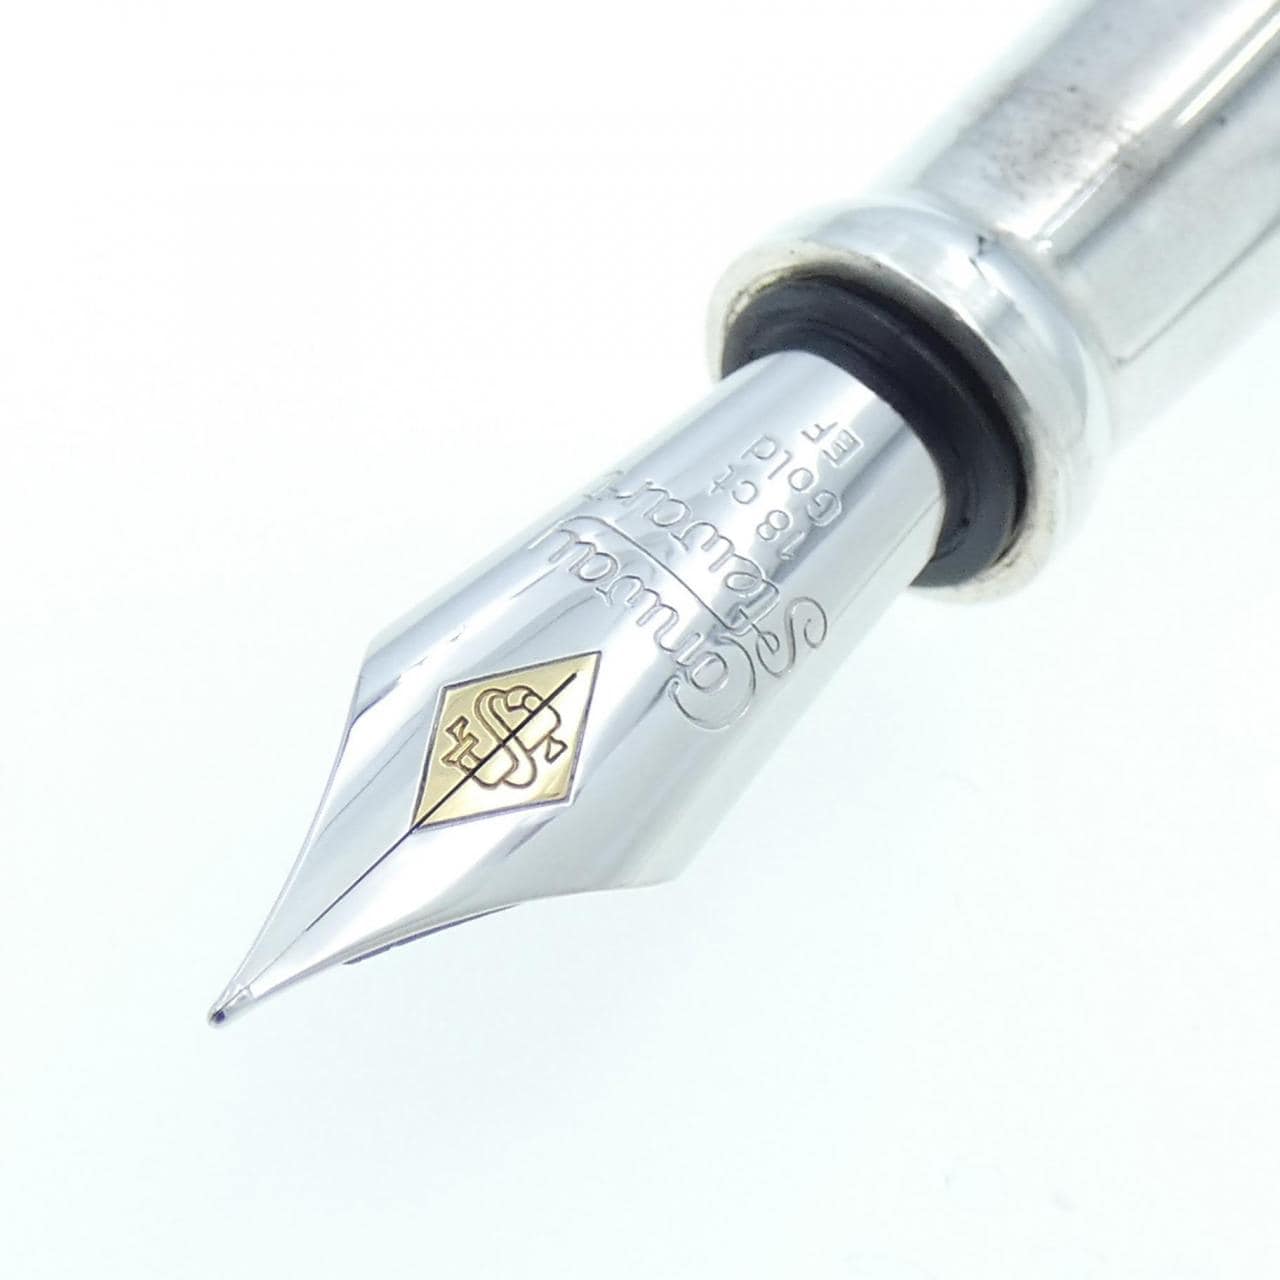 Conway Stewart Elegance Cromwell Limited Edition Fountain Pen